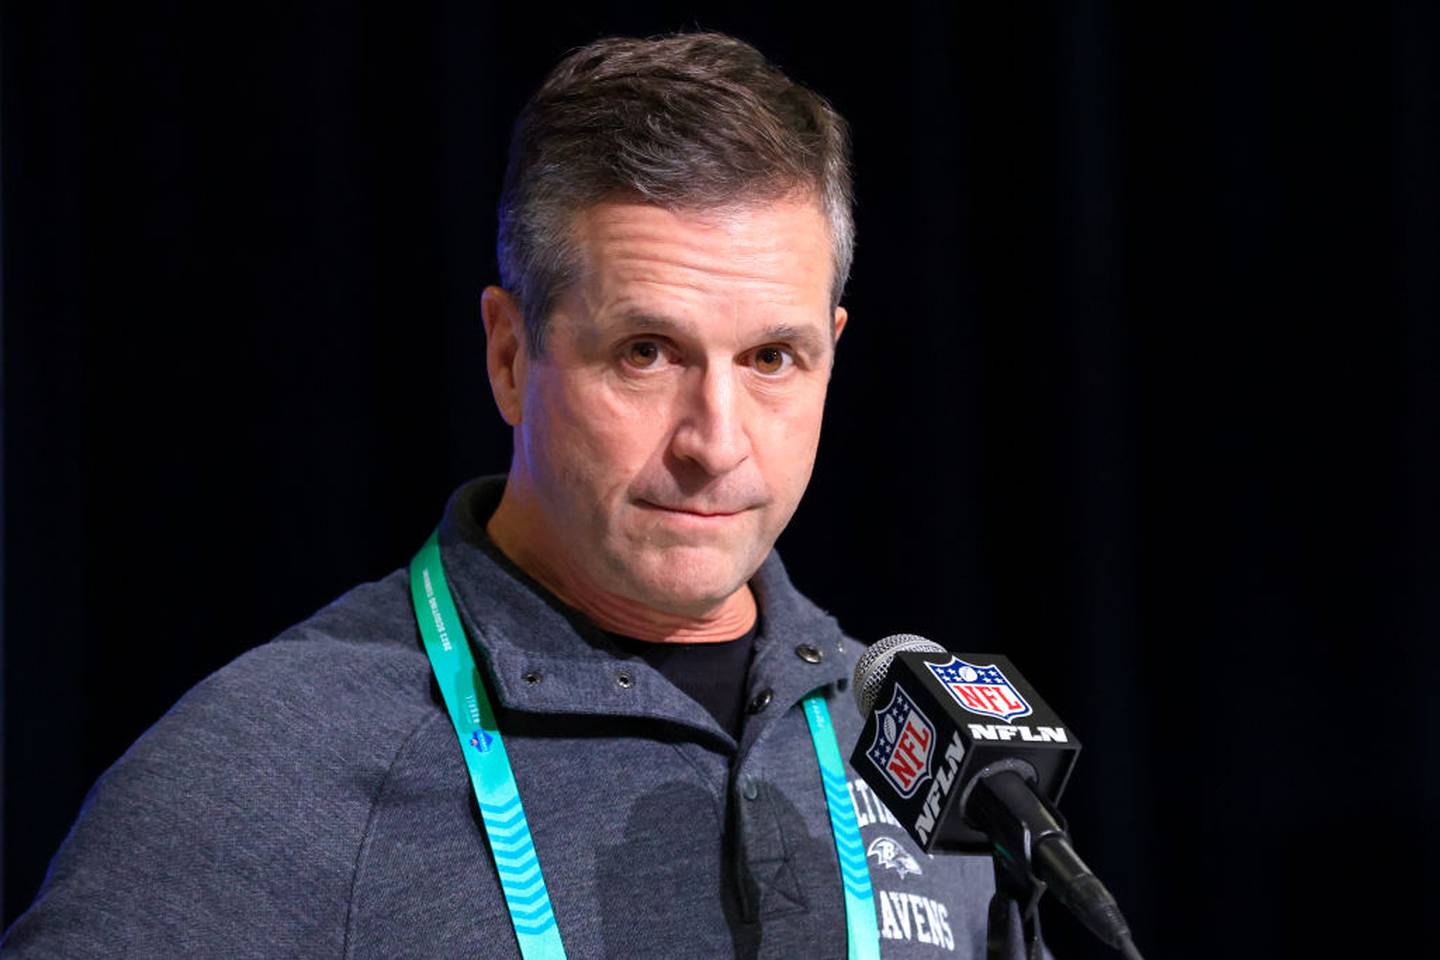 INDIANAPOLIS, INDIANA - MARCH 01: Head coach John Harbaugh of the Baltimore Ravens speaks to the media during the NFL Combine at Lucas Oil Stadium on March 01, 2023 in Indianapolis, Indiana